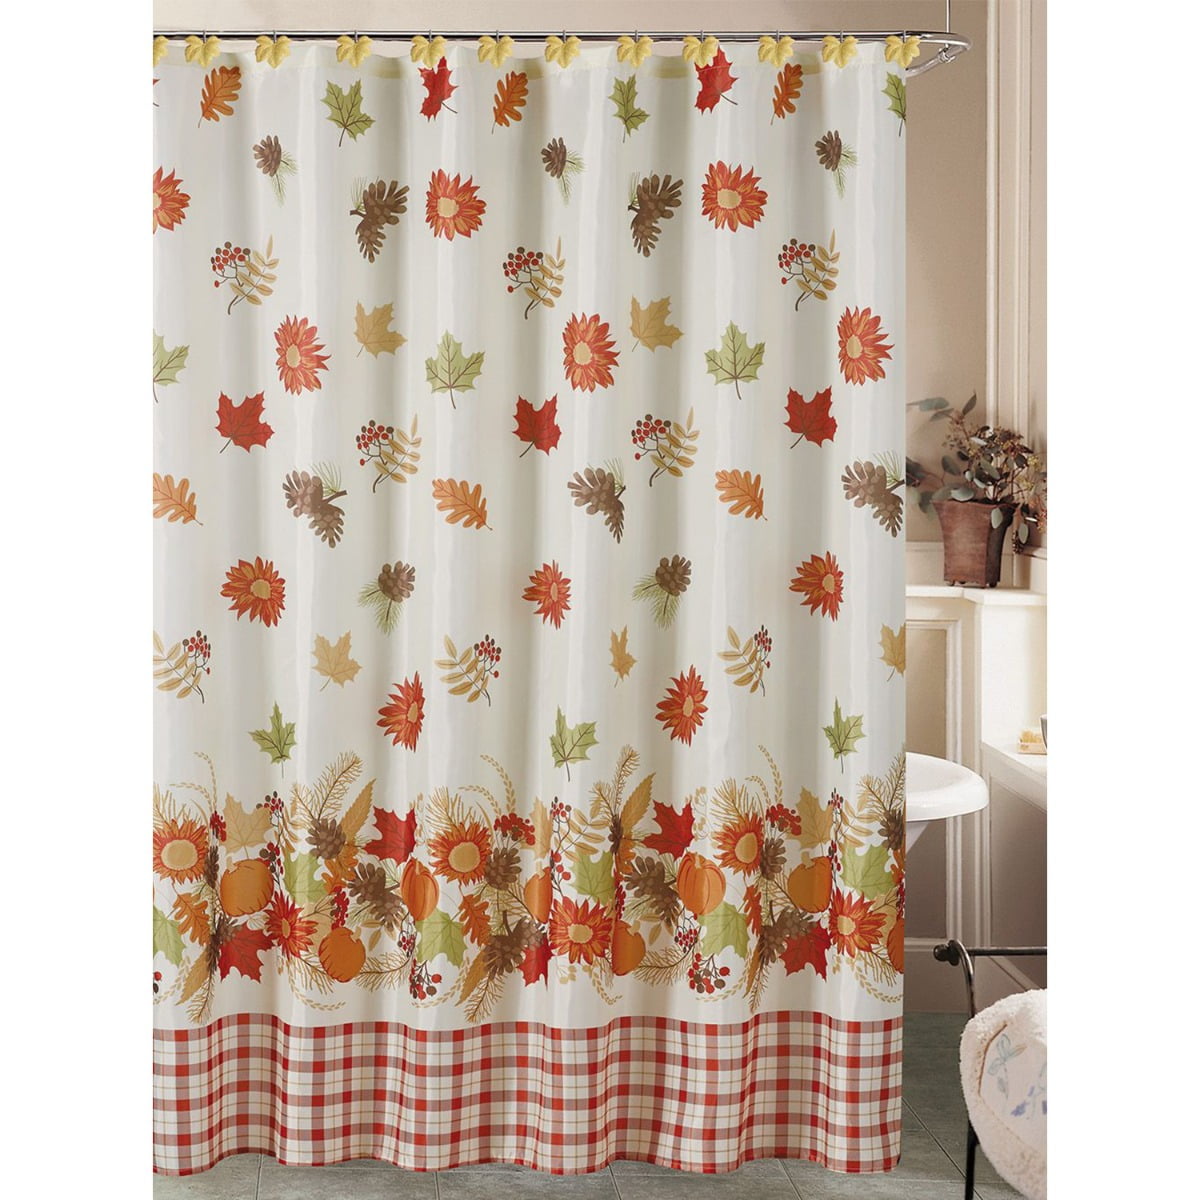 Details about   Autumn Maple Leaves Shower Curtain Complete Bathroom Set Waterproof 